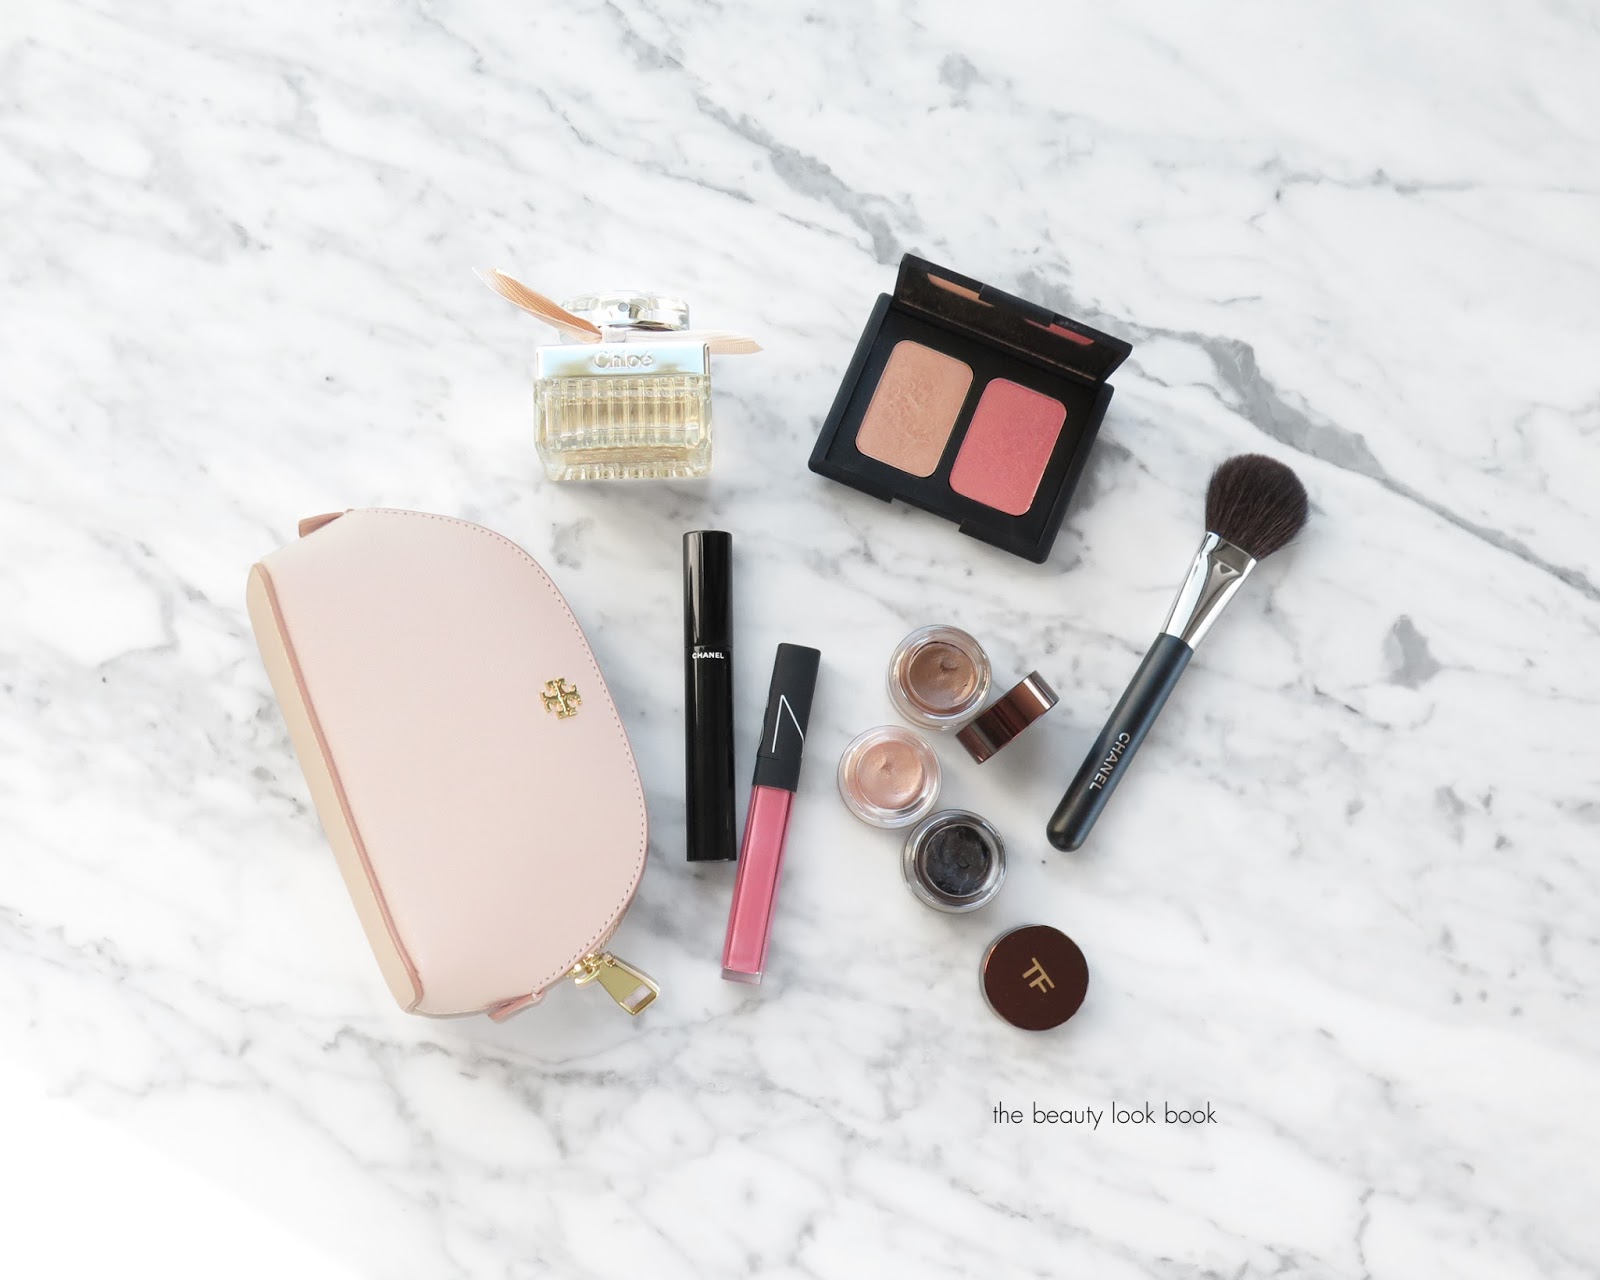 Sunday Details and Loves - The Beauty Look Book